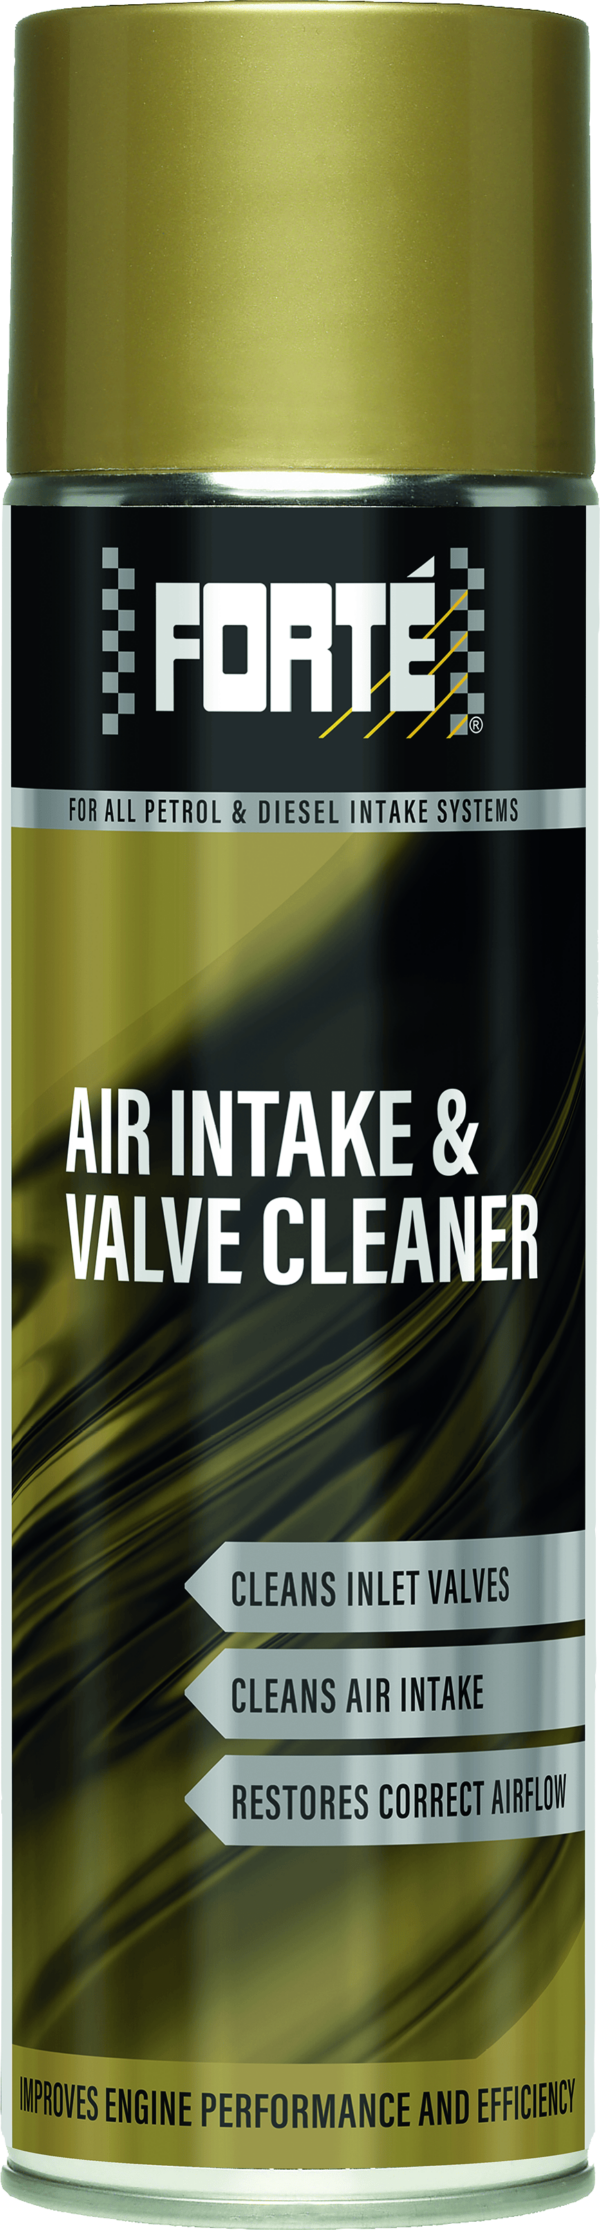 Air Intake and Valve Cleaner